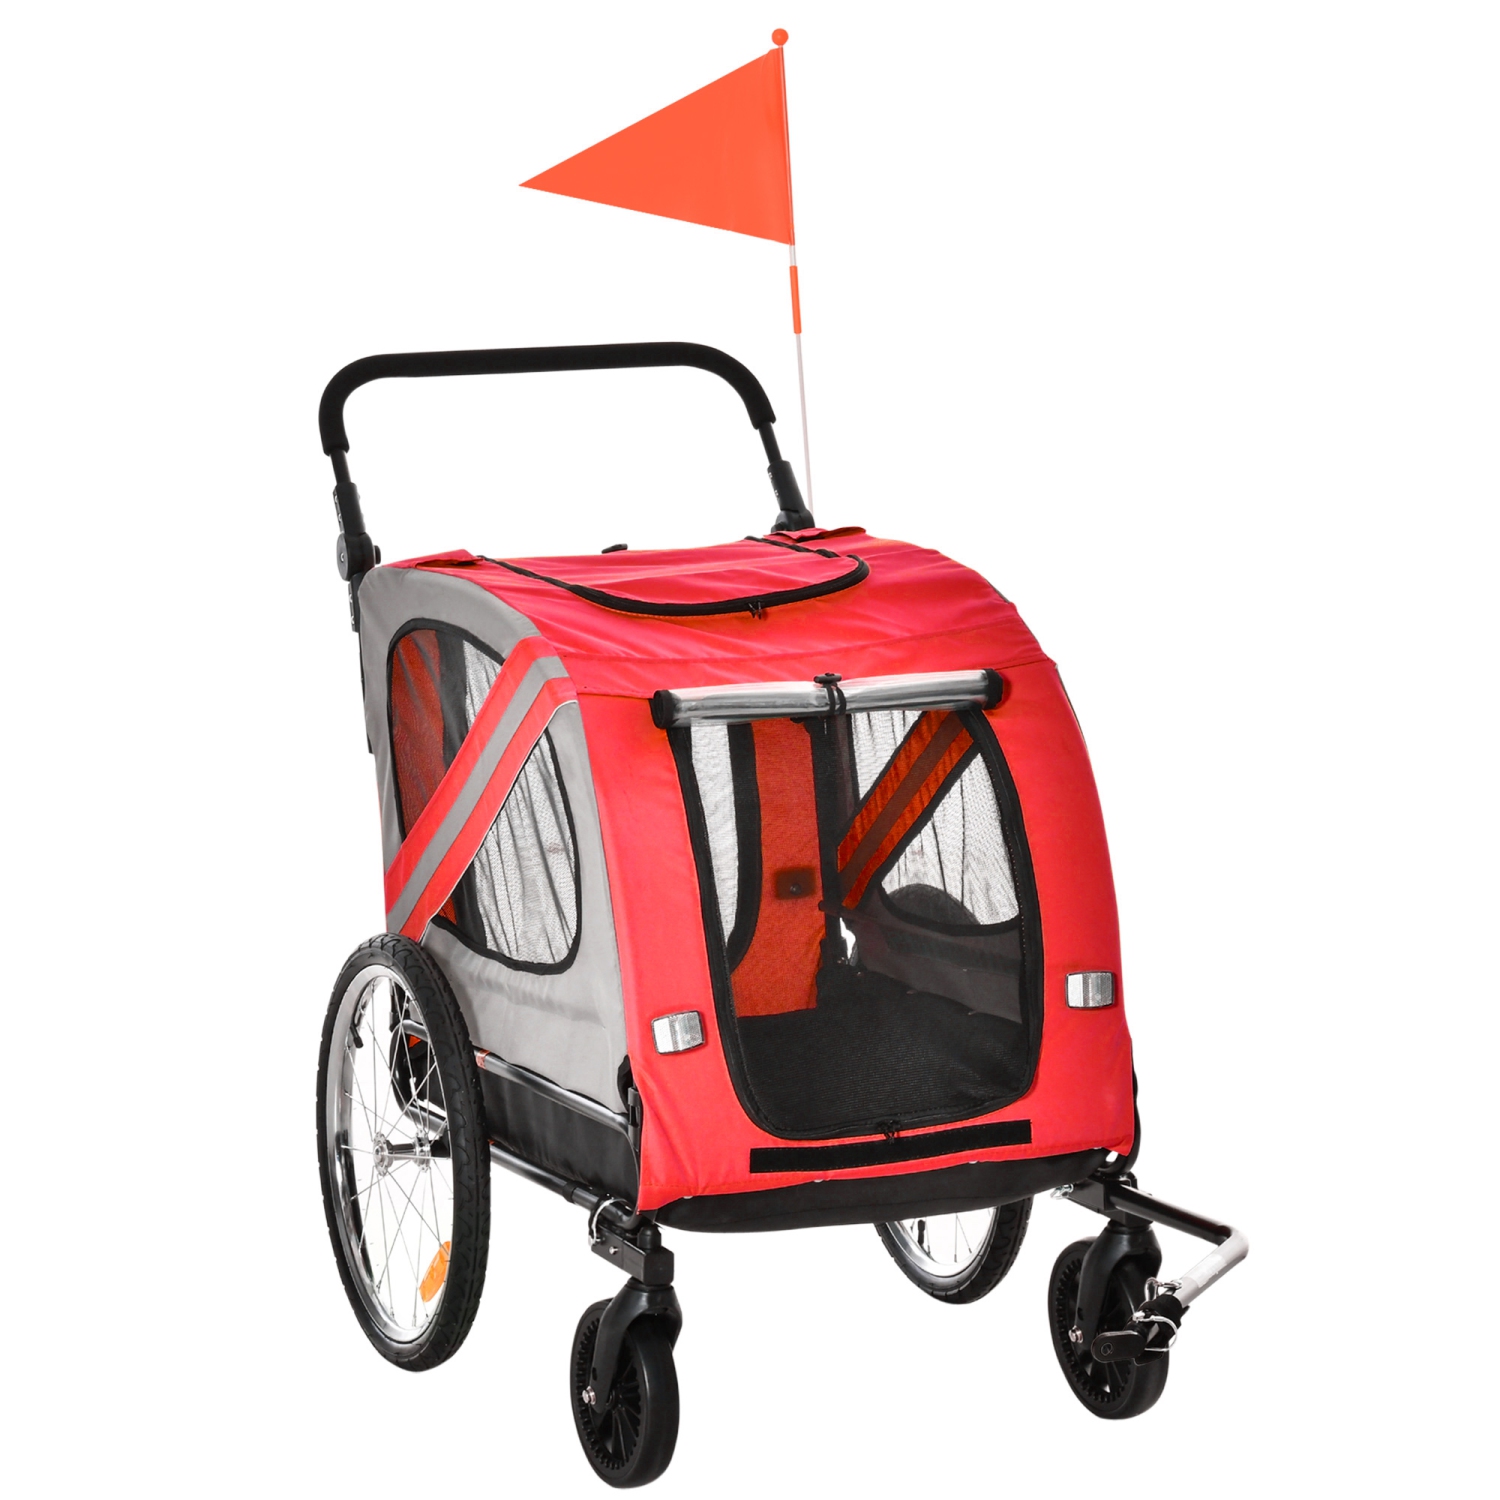 Aosom Dog Bike Trailer, 2-in-1 Dog Wagon Pet Stroller for Travel with Universal Wheel Reflectors Flag, for Small and Medium Dogs, Red